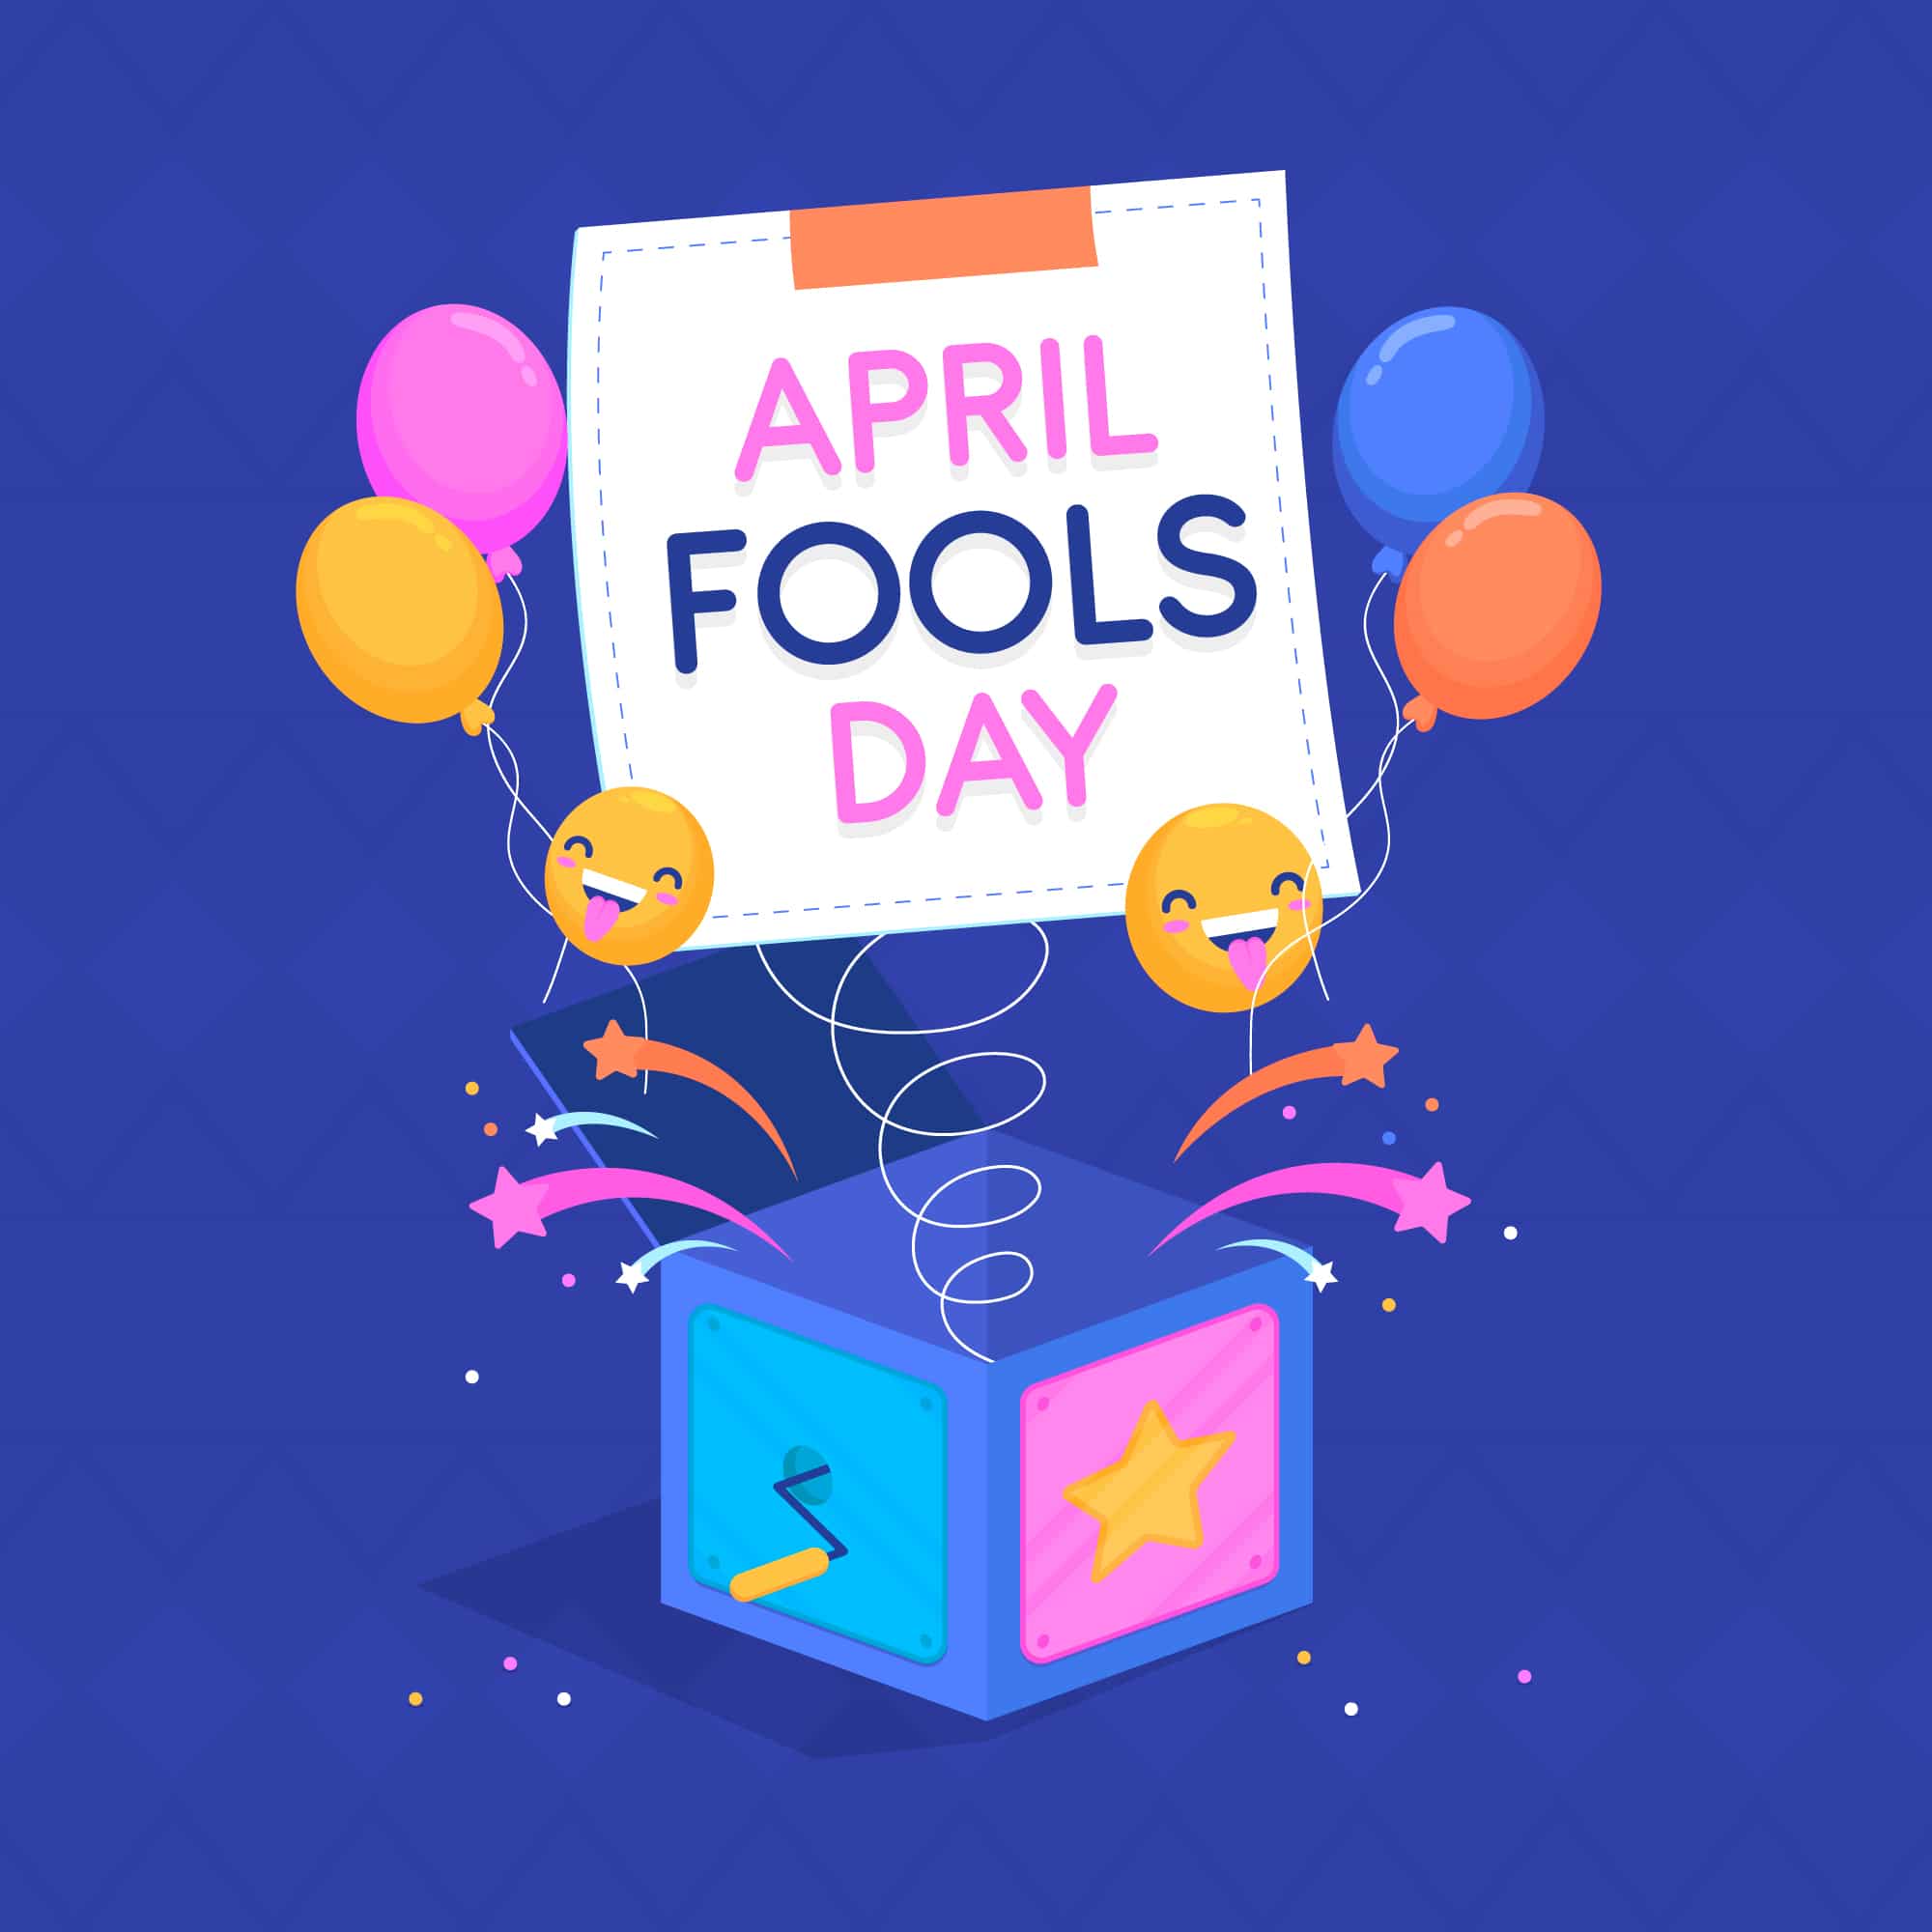 Happy April Fool's Day 2023 Wishes, WhatsApp messages, ideas, jokes